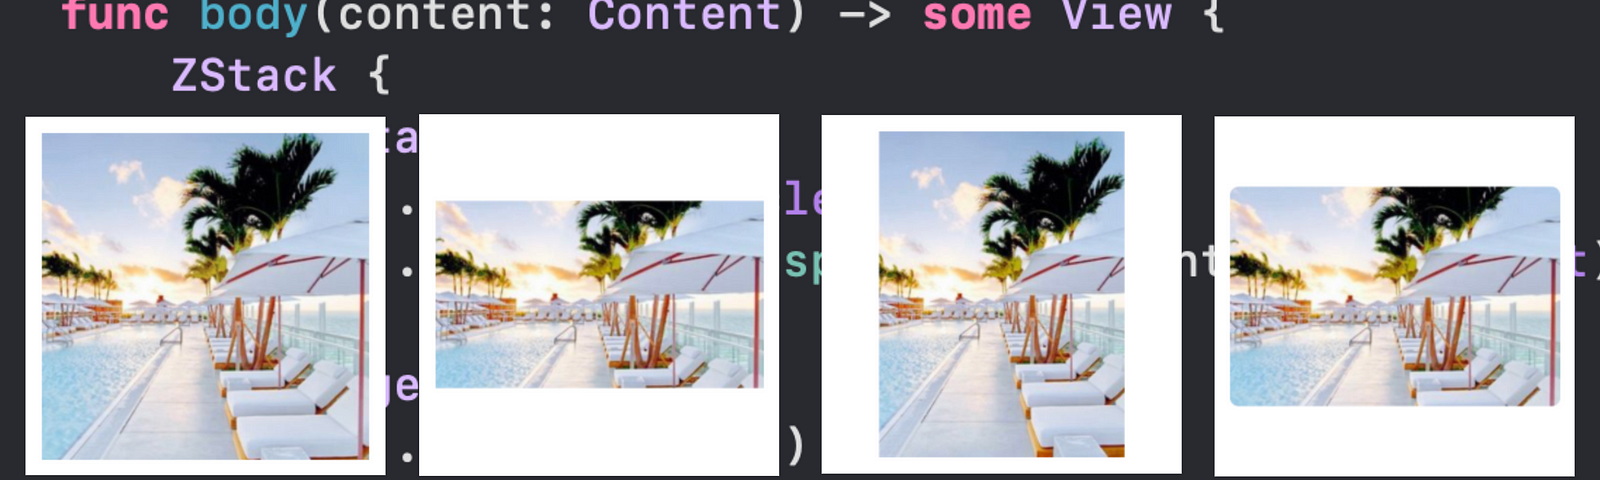 The same image is displayed four times, each at a different size. Images are positioned above the SwiftUI code that handles resizing the images.